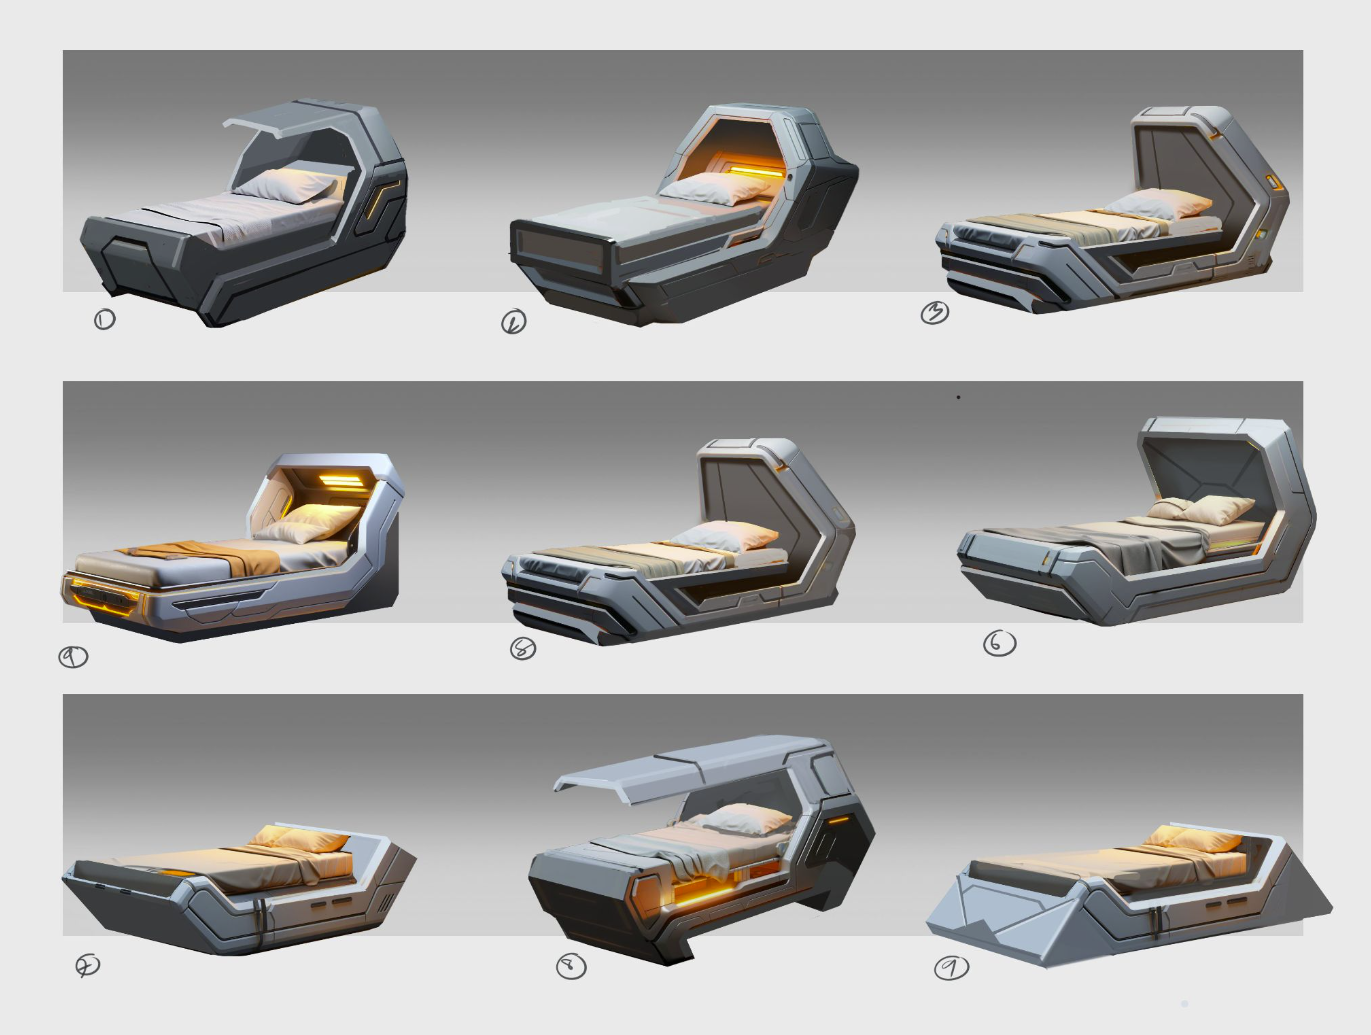 Some of Jonathan's bed concepts.